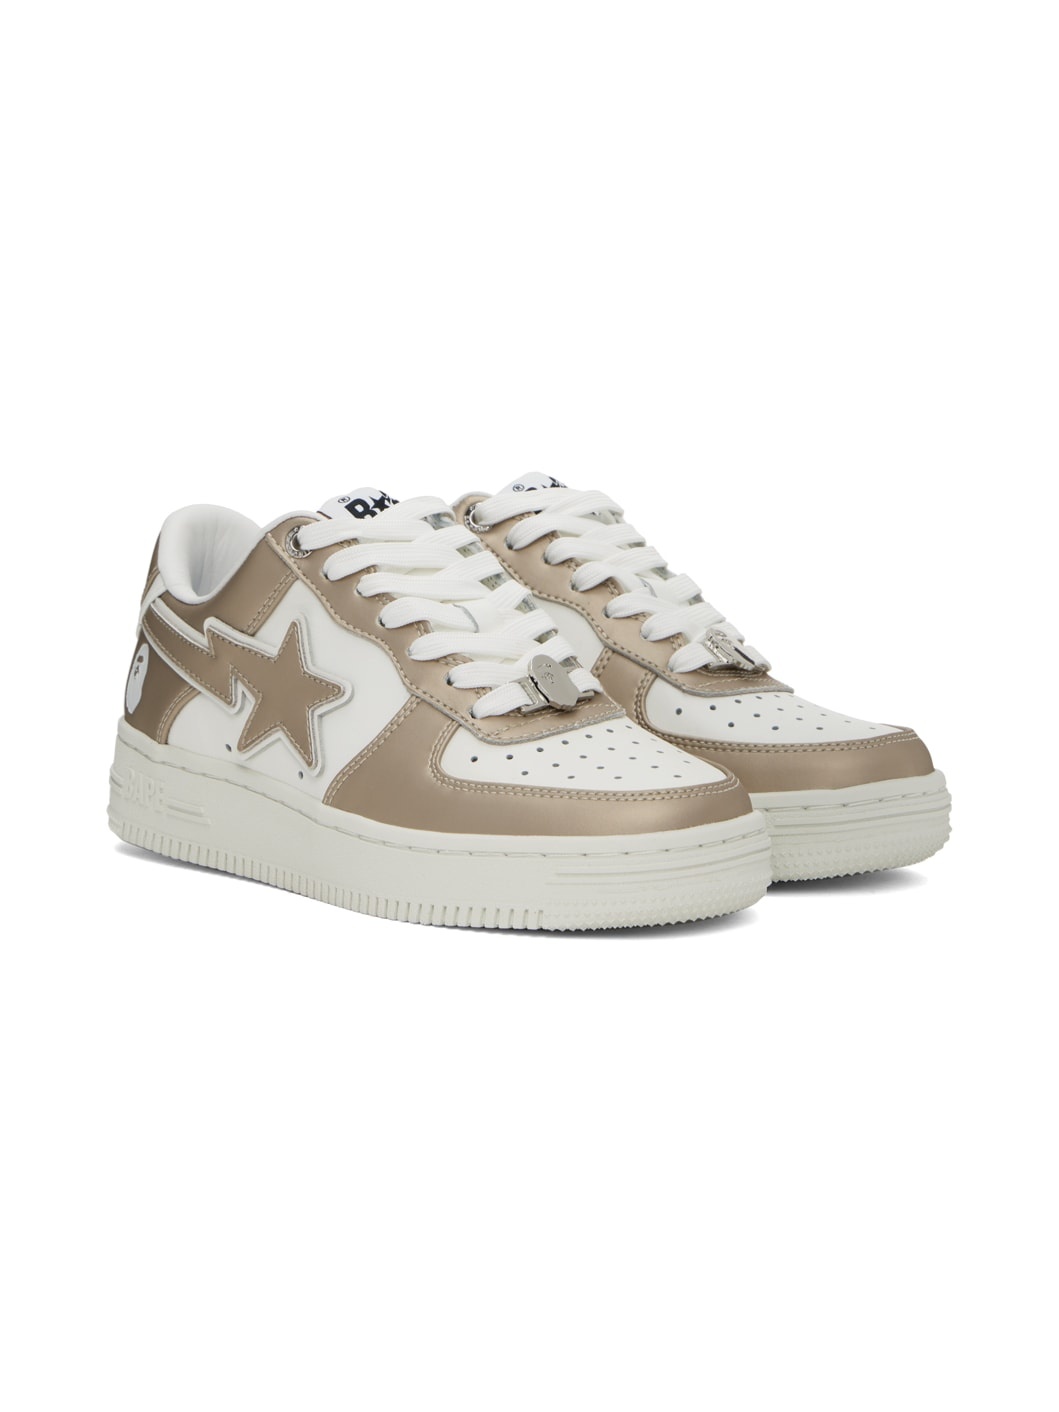 White & Gold STA #4 Sneakers - 4